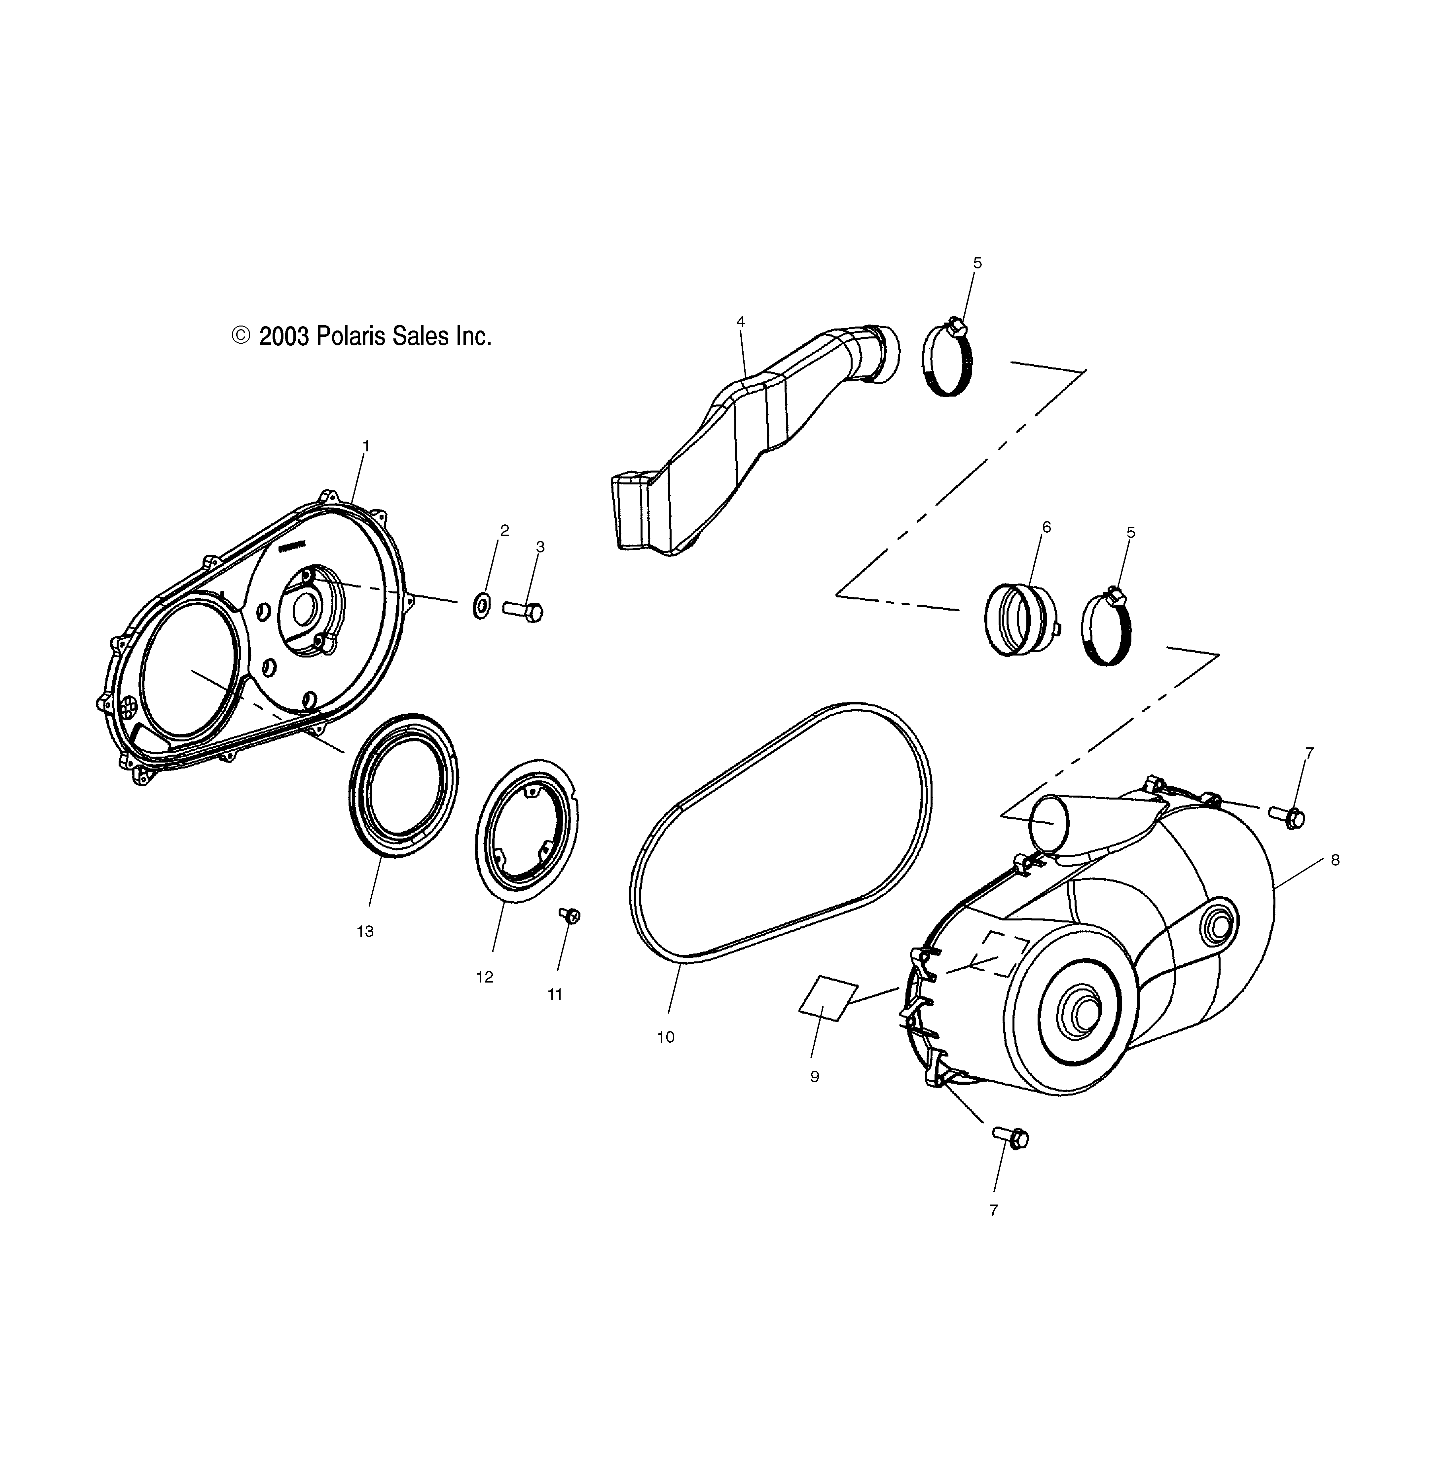 Part Number : 2201954 CLUTCH COVER KIT  INNER